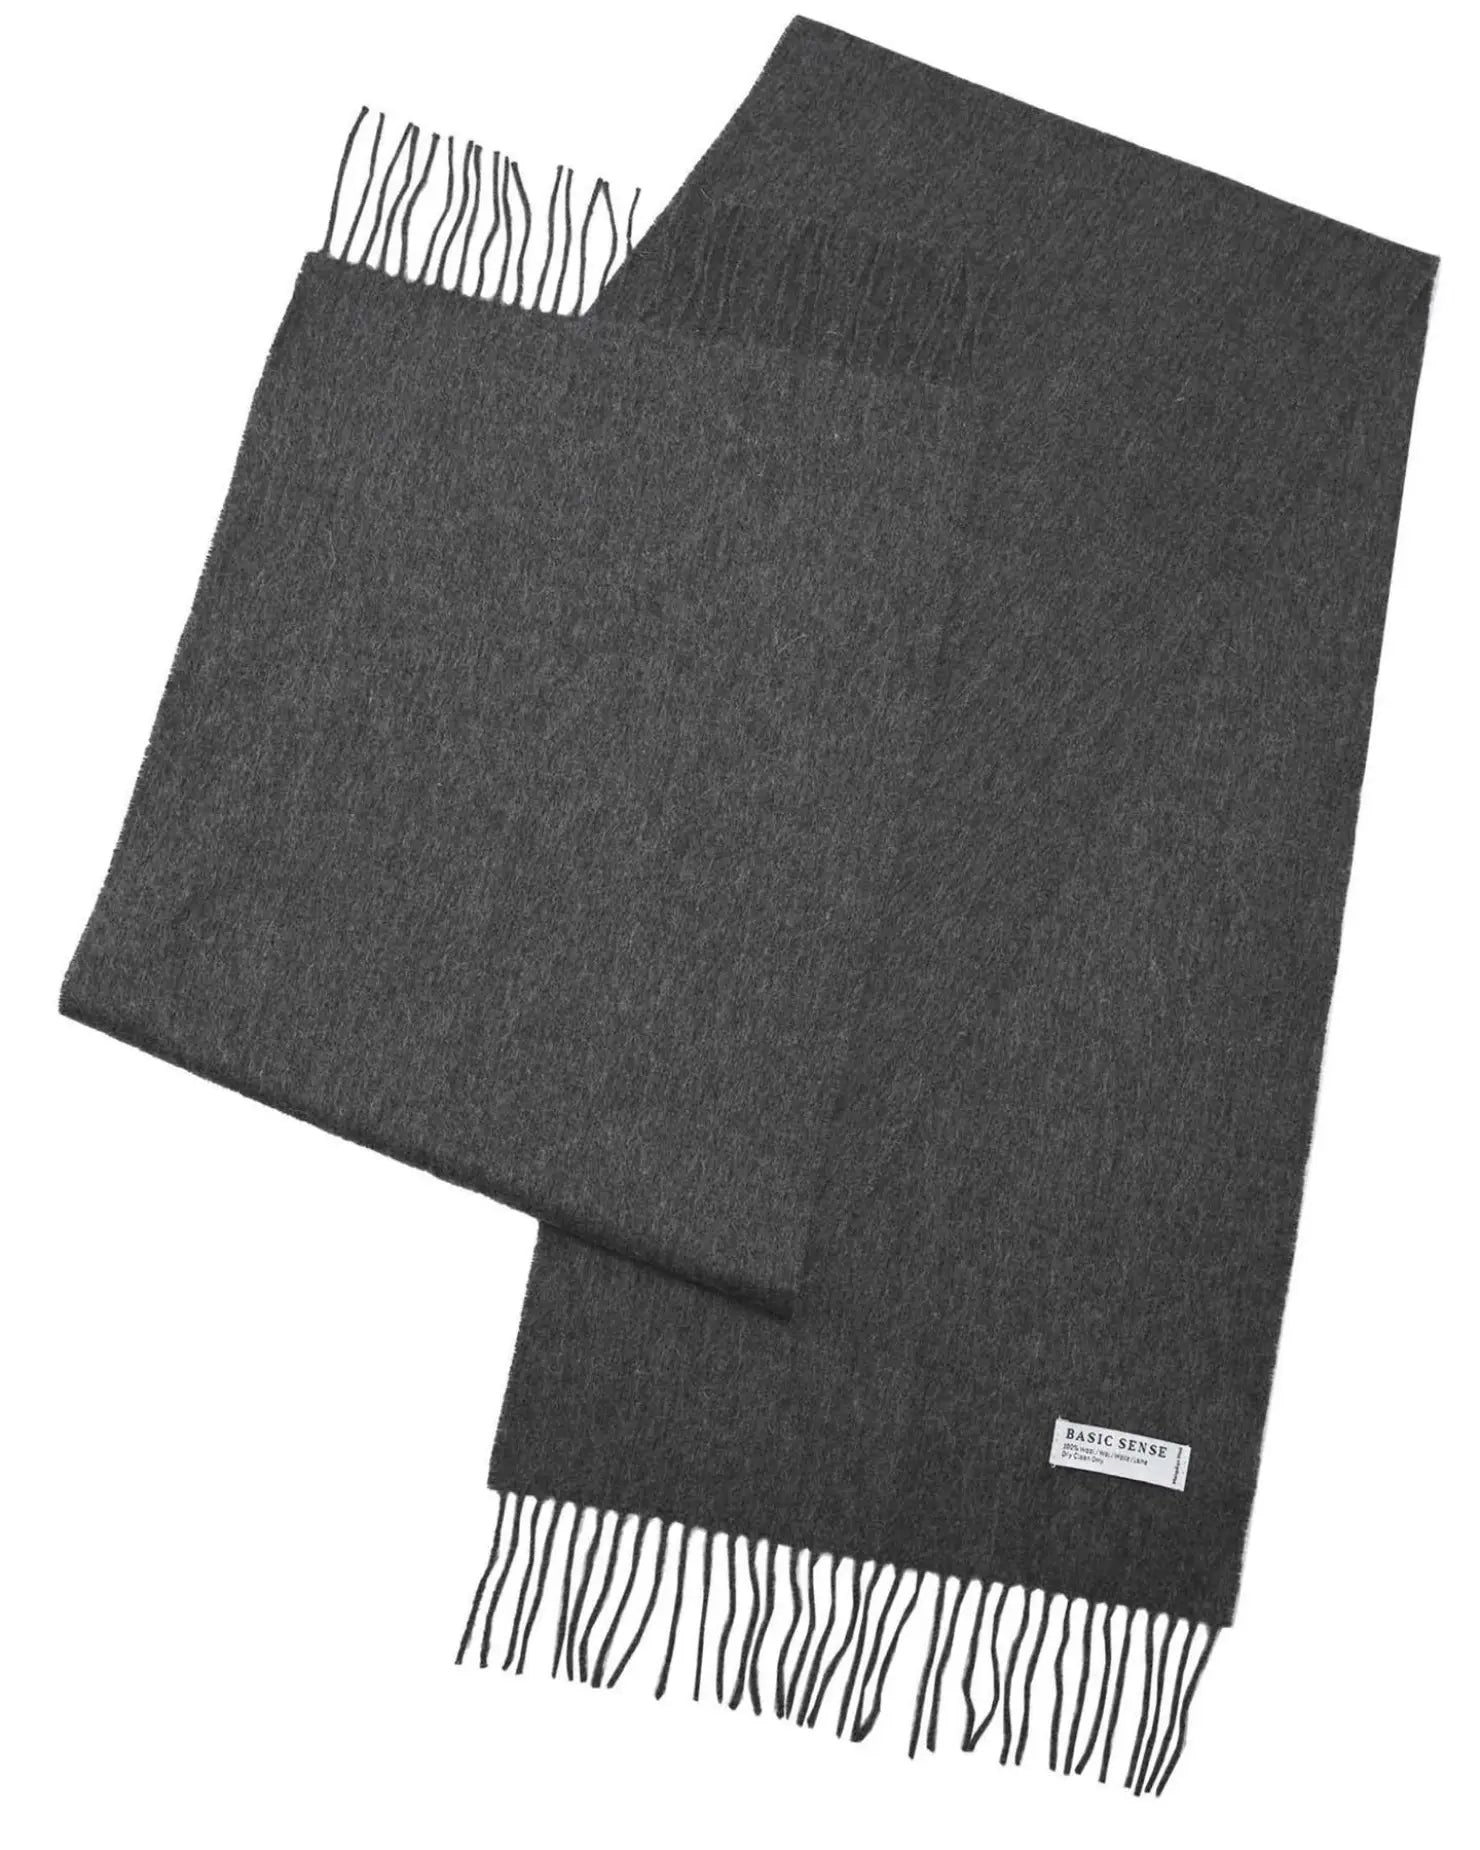 Mongolian wool scarf in dark grey with fringes, 190 x 32 cm